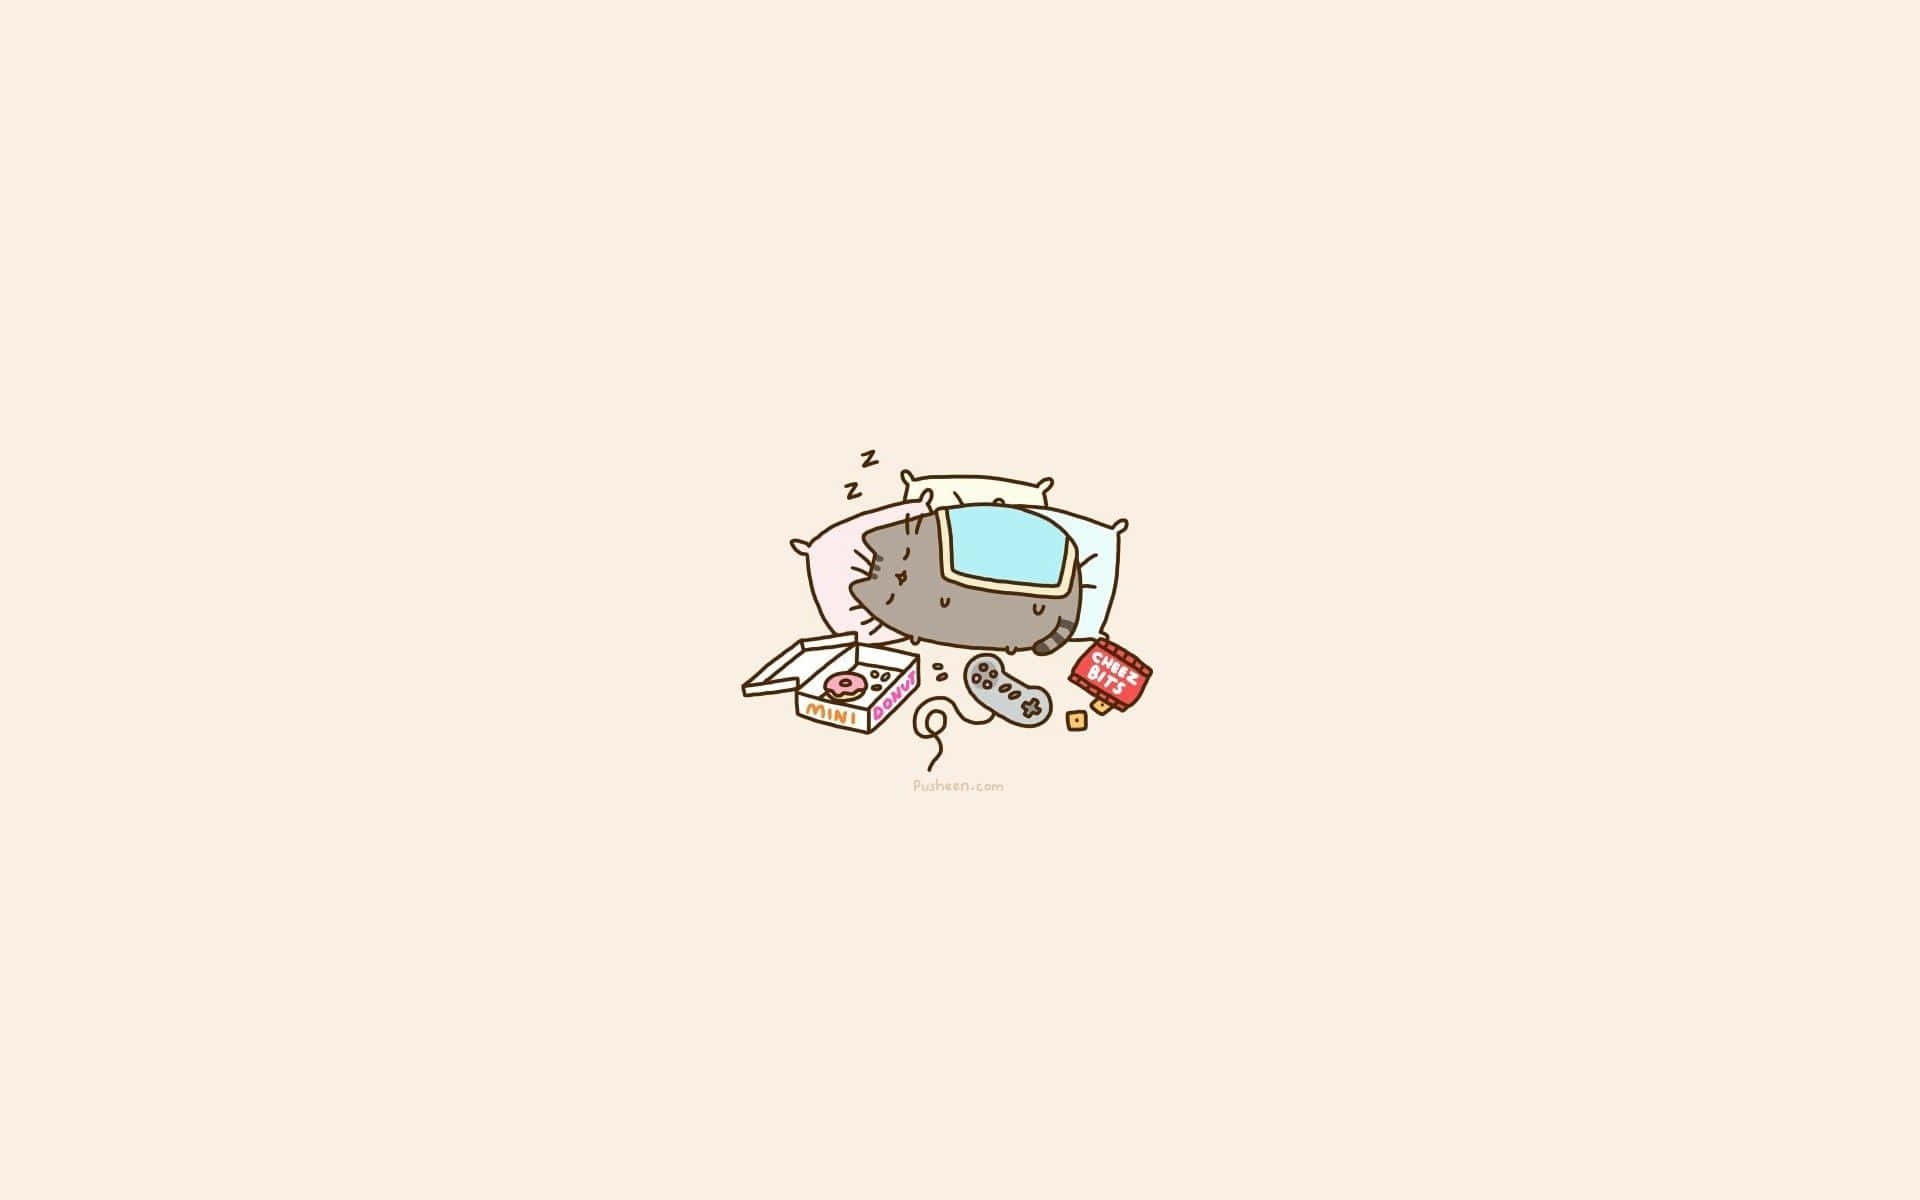 Get productive and stay cute with the 'Pusheen Pc'! Wallpaper